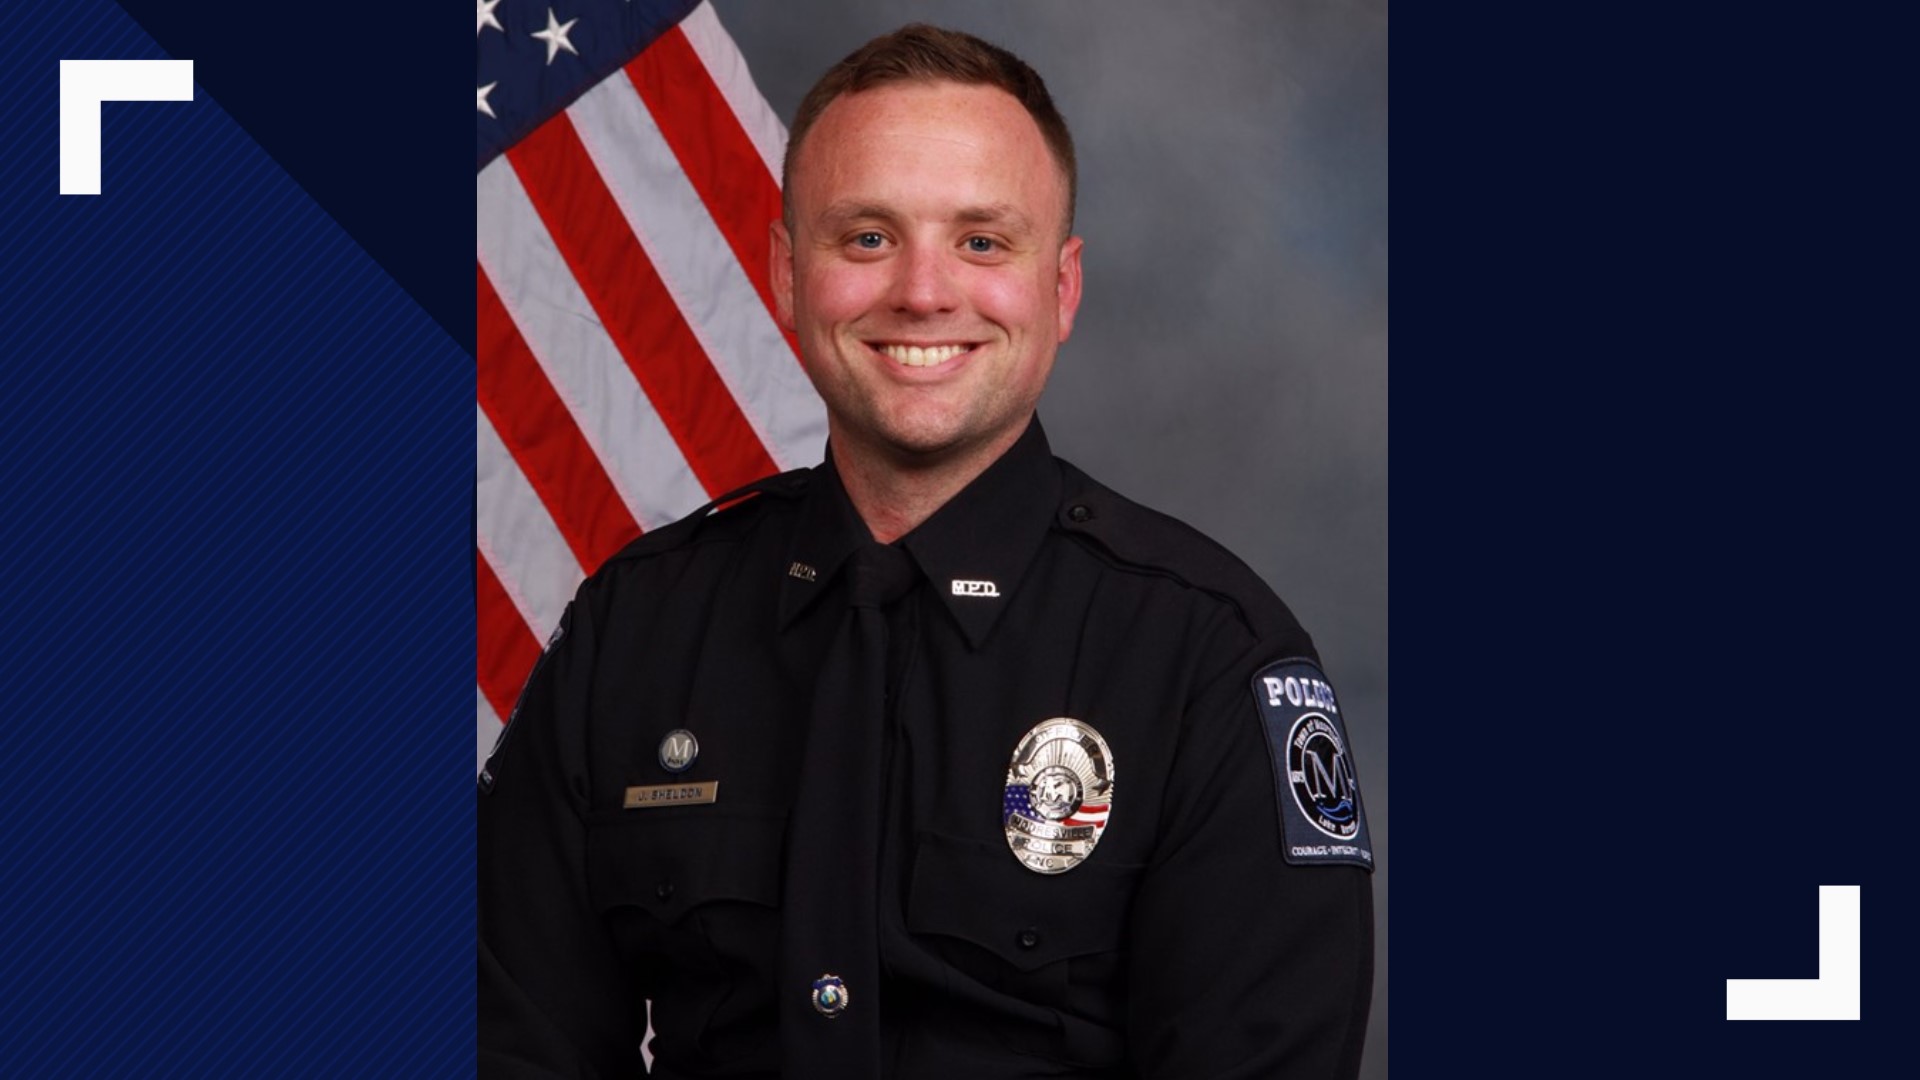 Mooresville Mayor Miles Atkins was devastated by the deadly shooting of officer Jordan Sheldon on Saturday night.